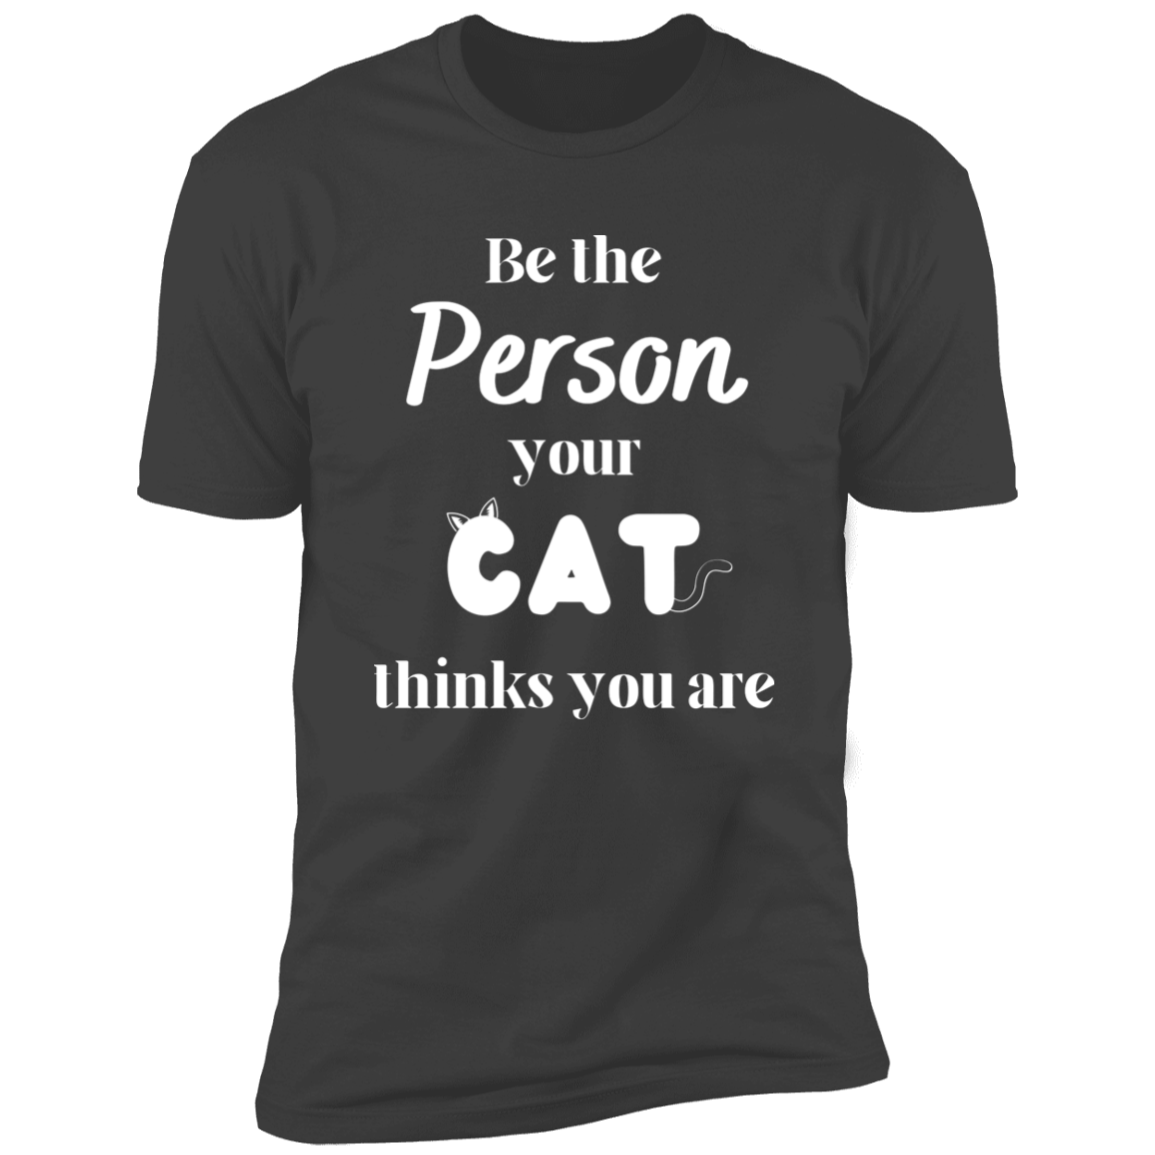 Be the Person Your Cat Thinks You Are T-shirt, Cat Shirt for humans, in heavy metal gray